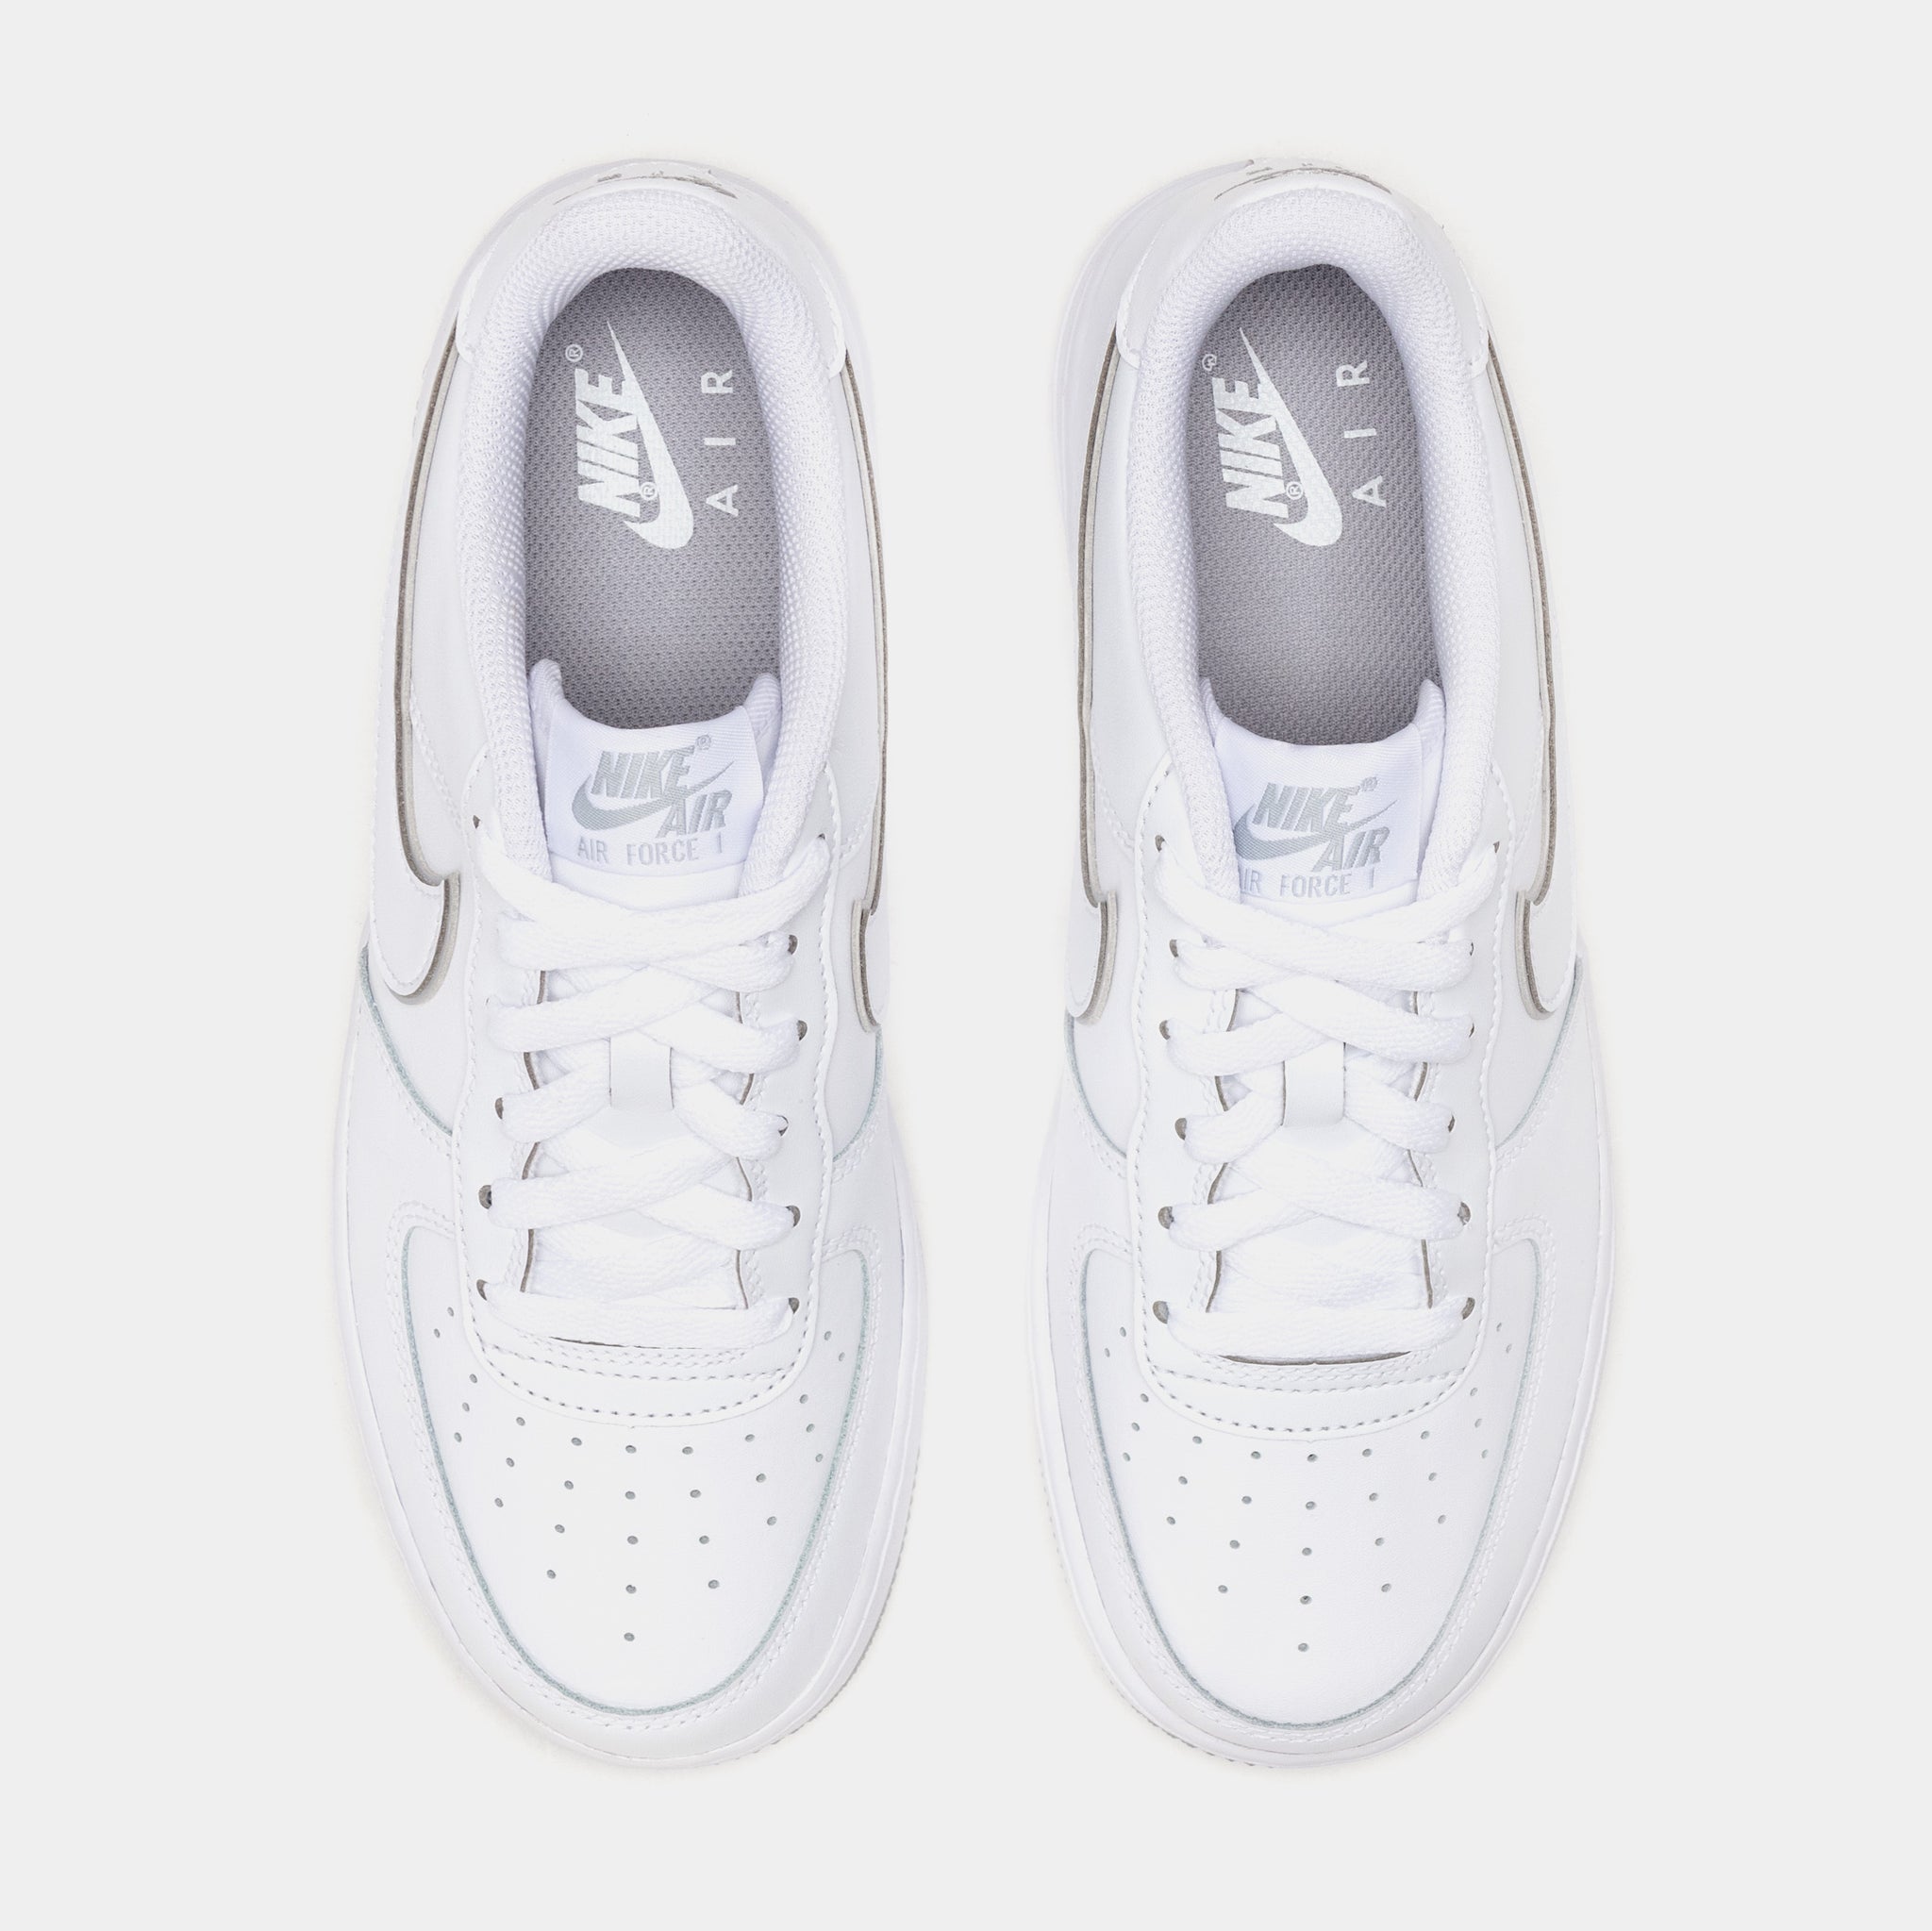 Nike Air Force 1 Grade School Lifestyle Shoes White Grey DX5805-100 ...